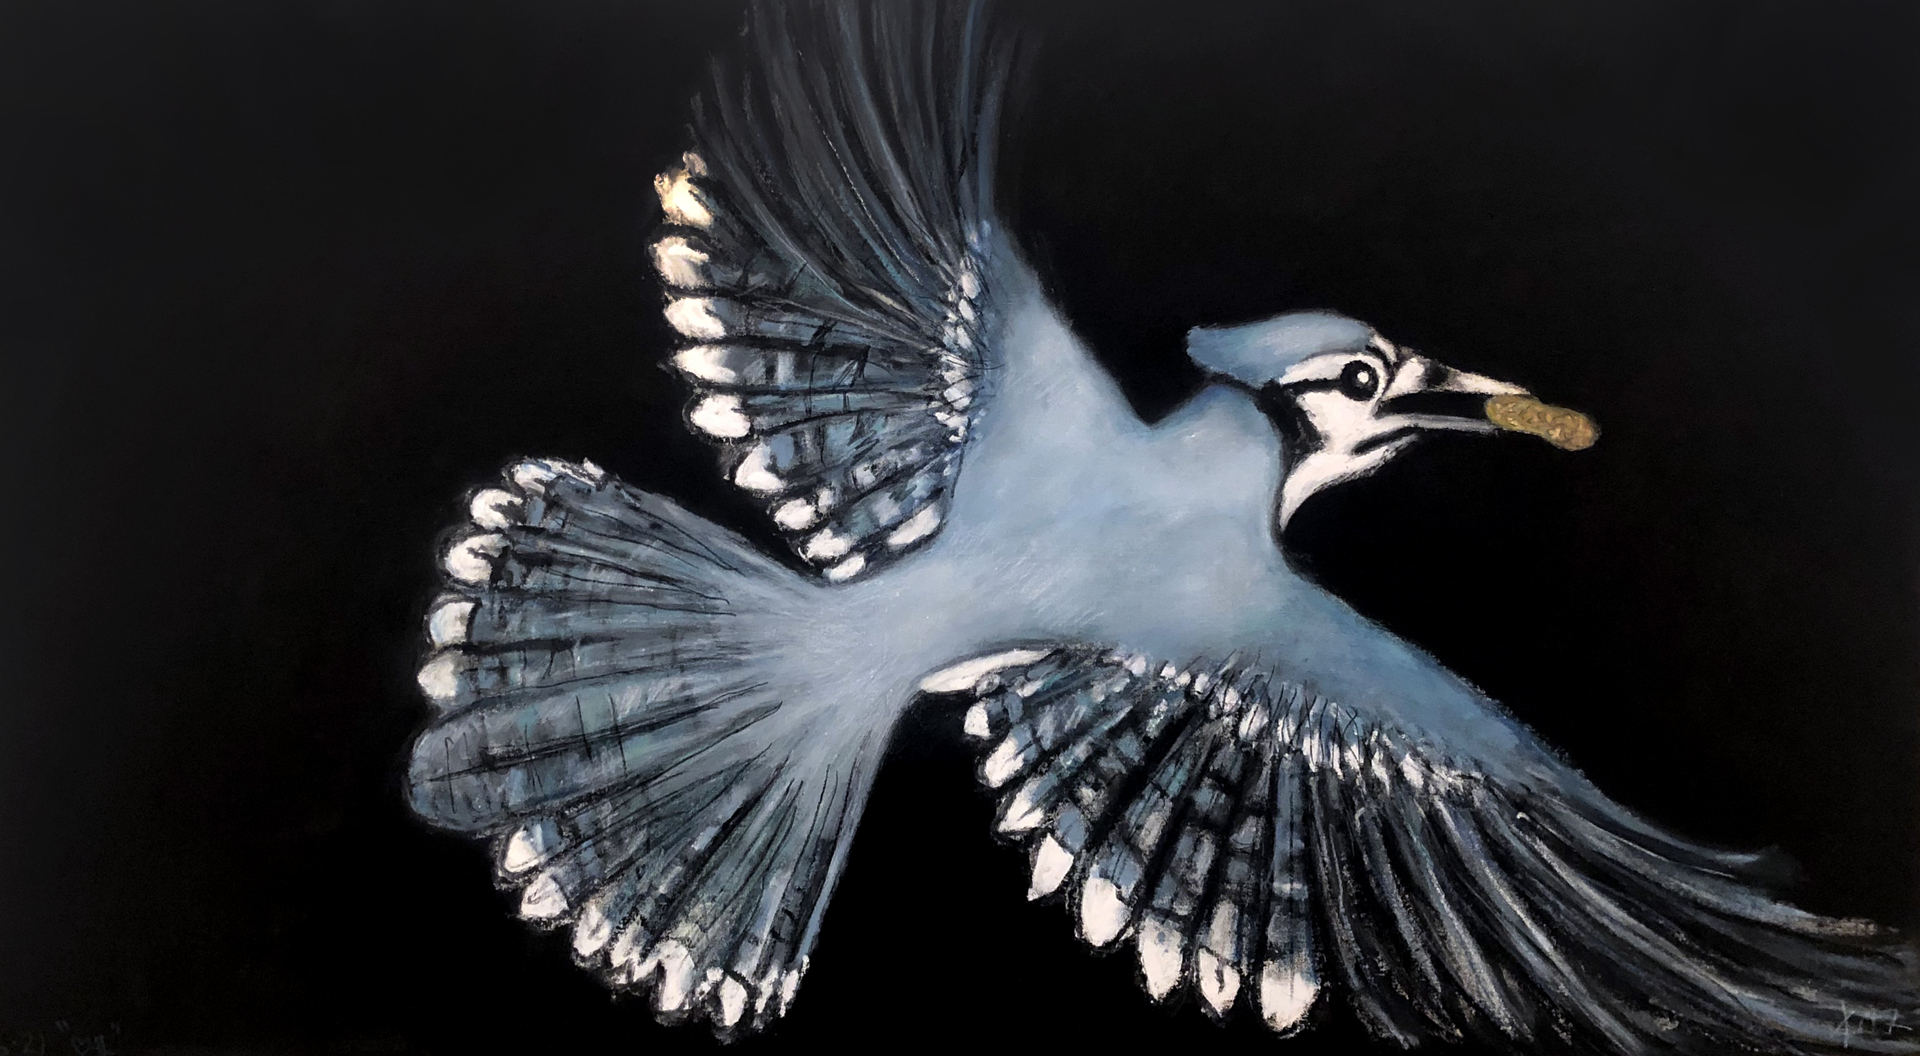 Blue Jay with Peanut by Frank X. Tolbert 2